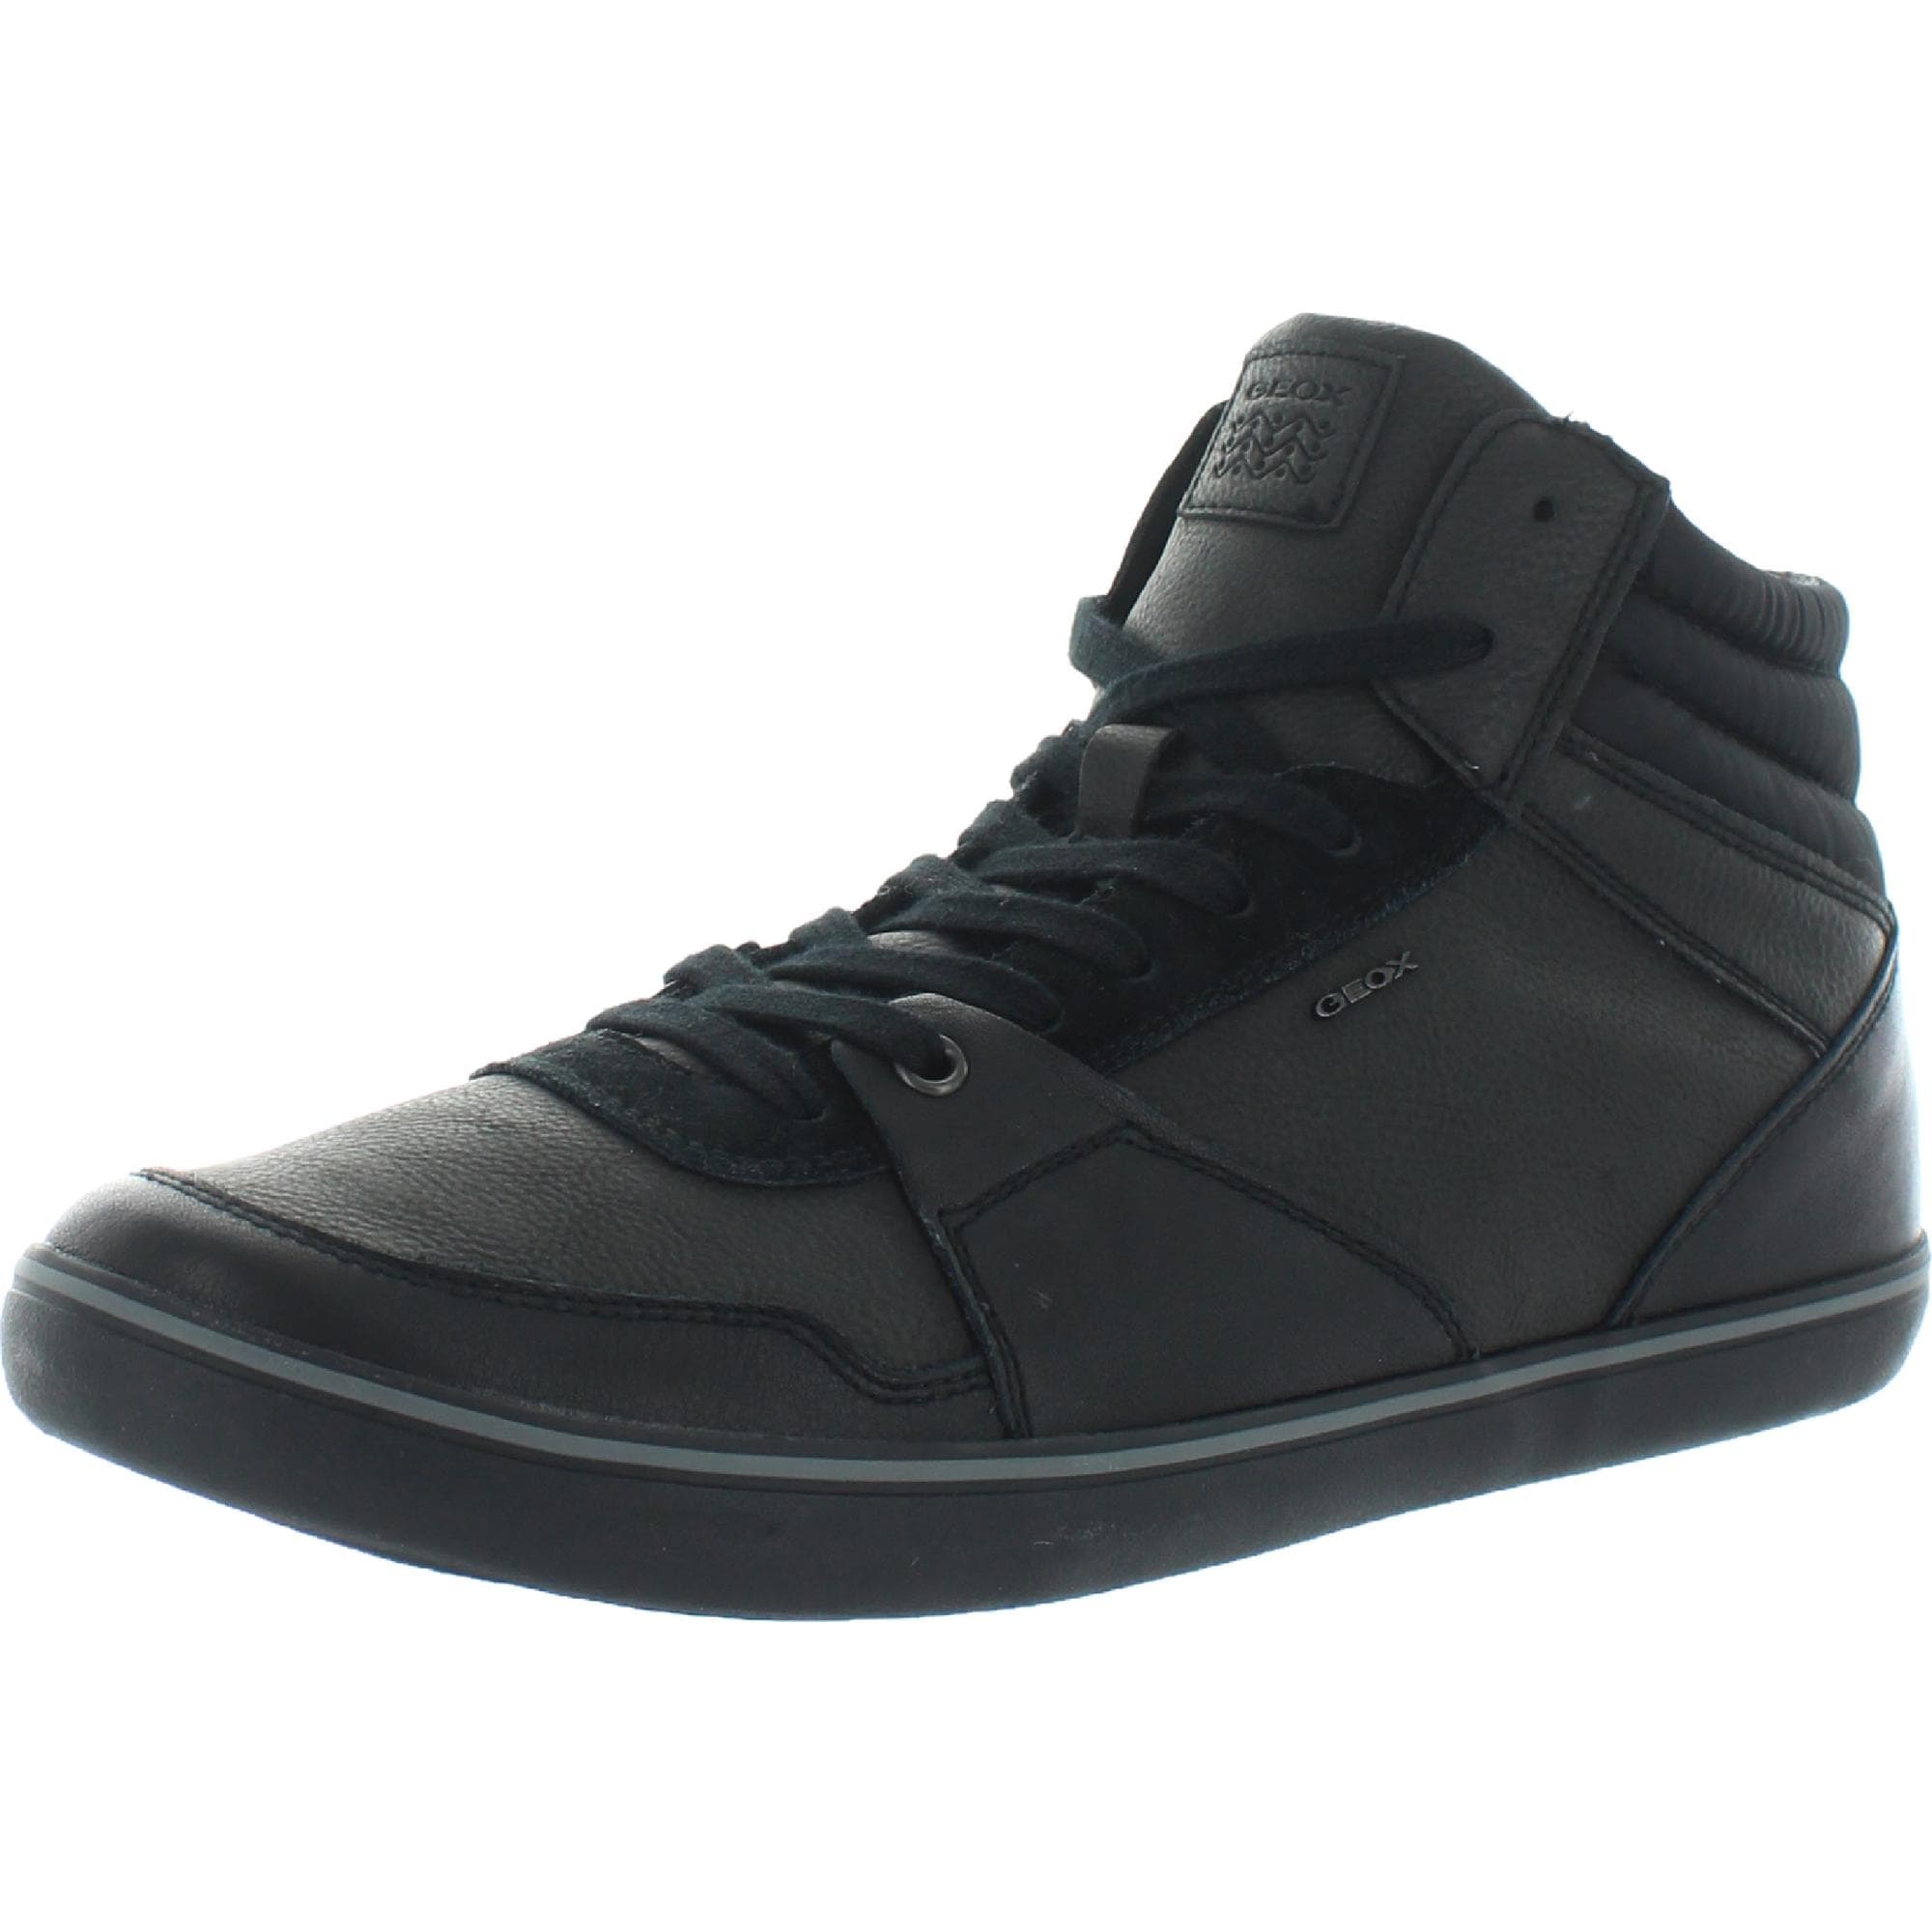 Top Sneakers Leather Breathable - Black 